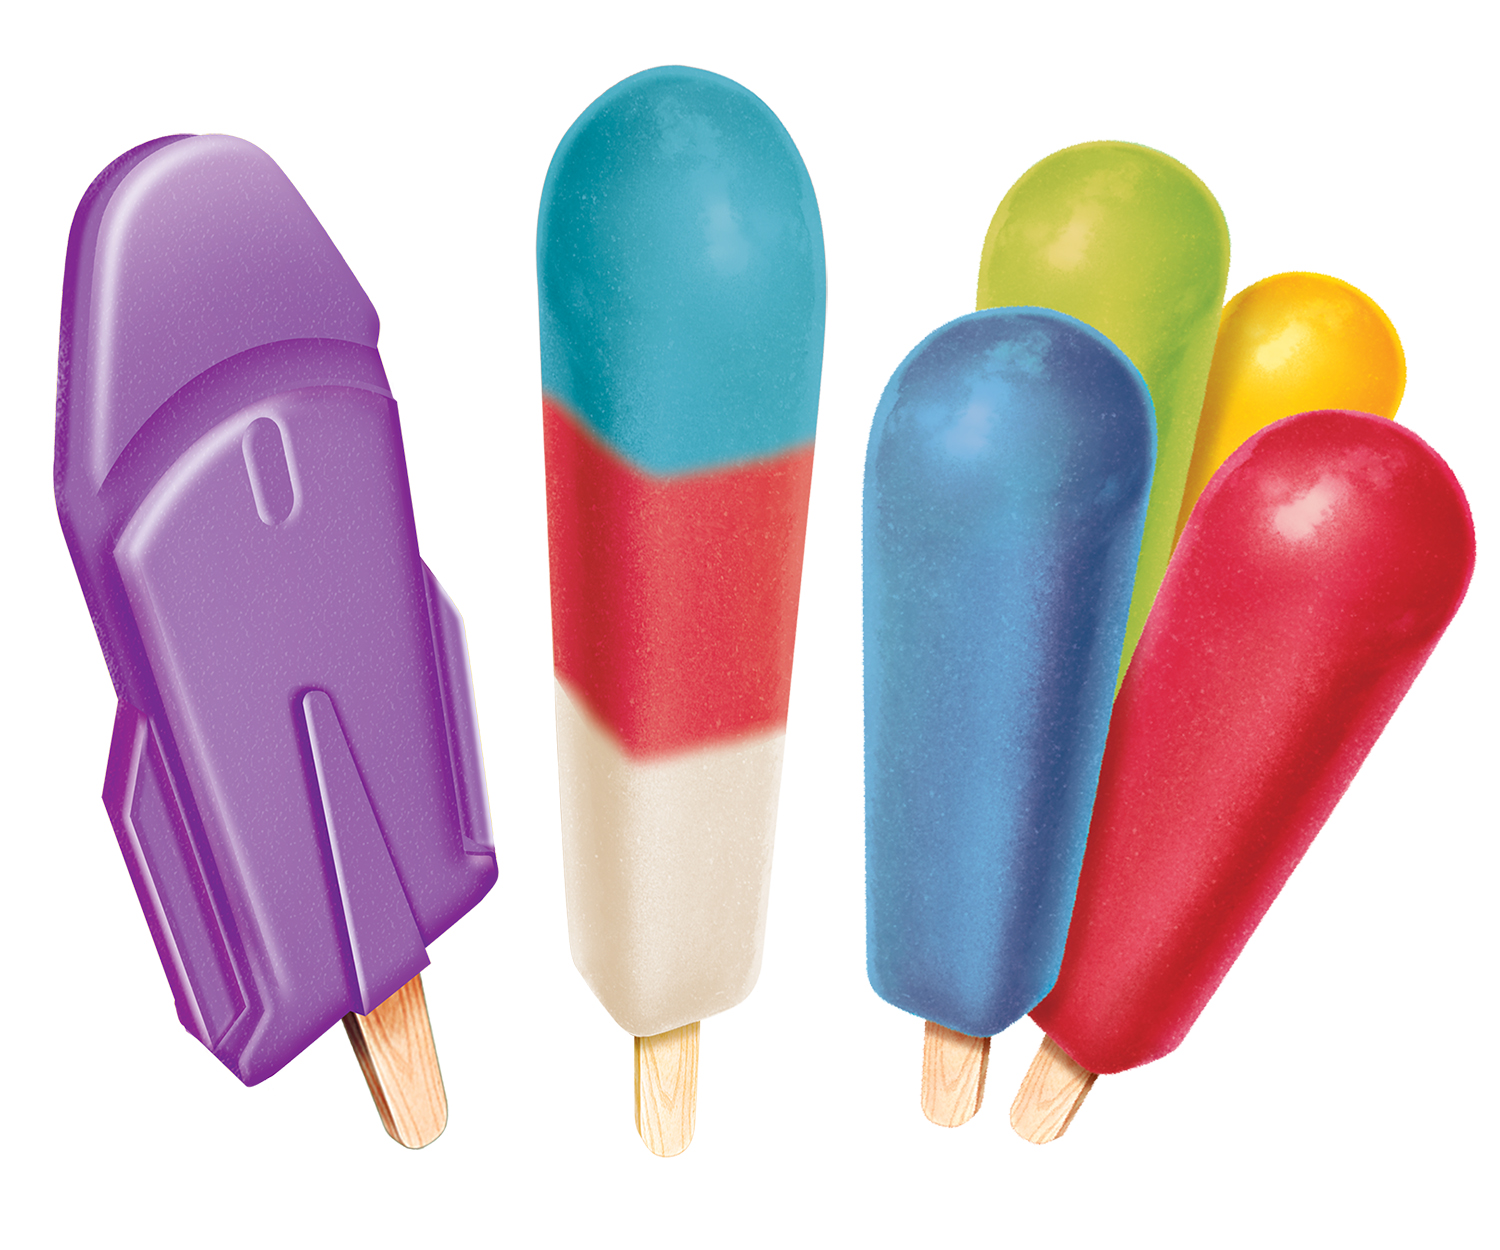 chapmans fruity lollys and rocket lollys from wholesale distributor transcold distribution